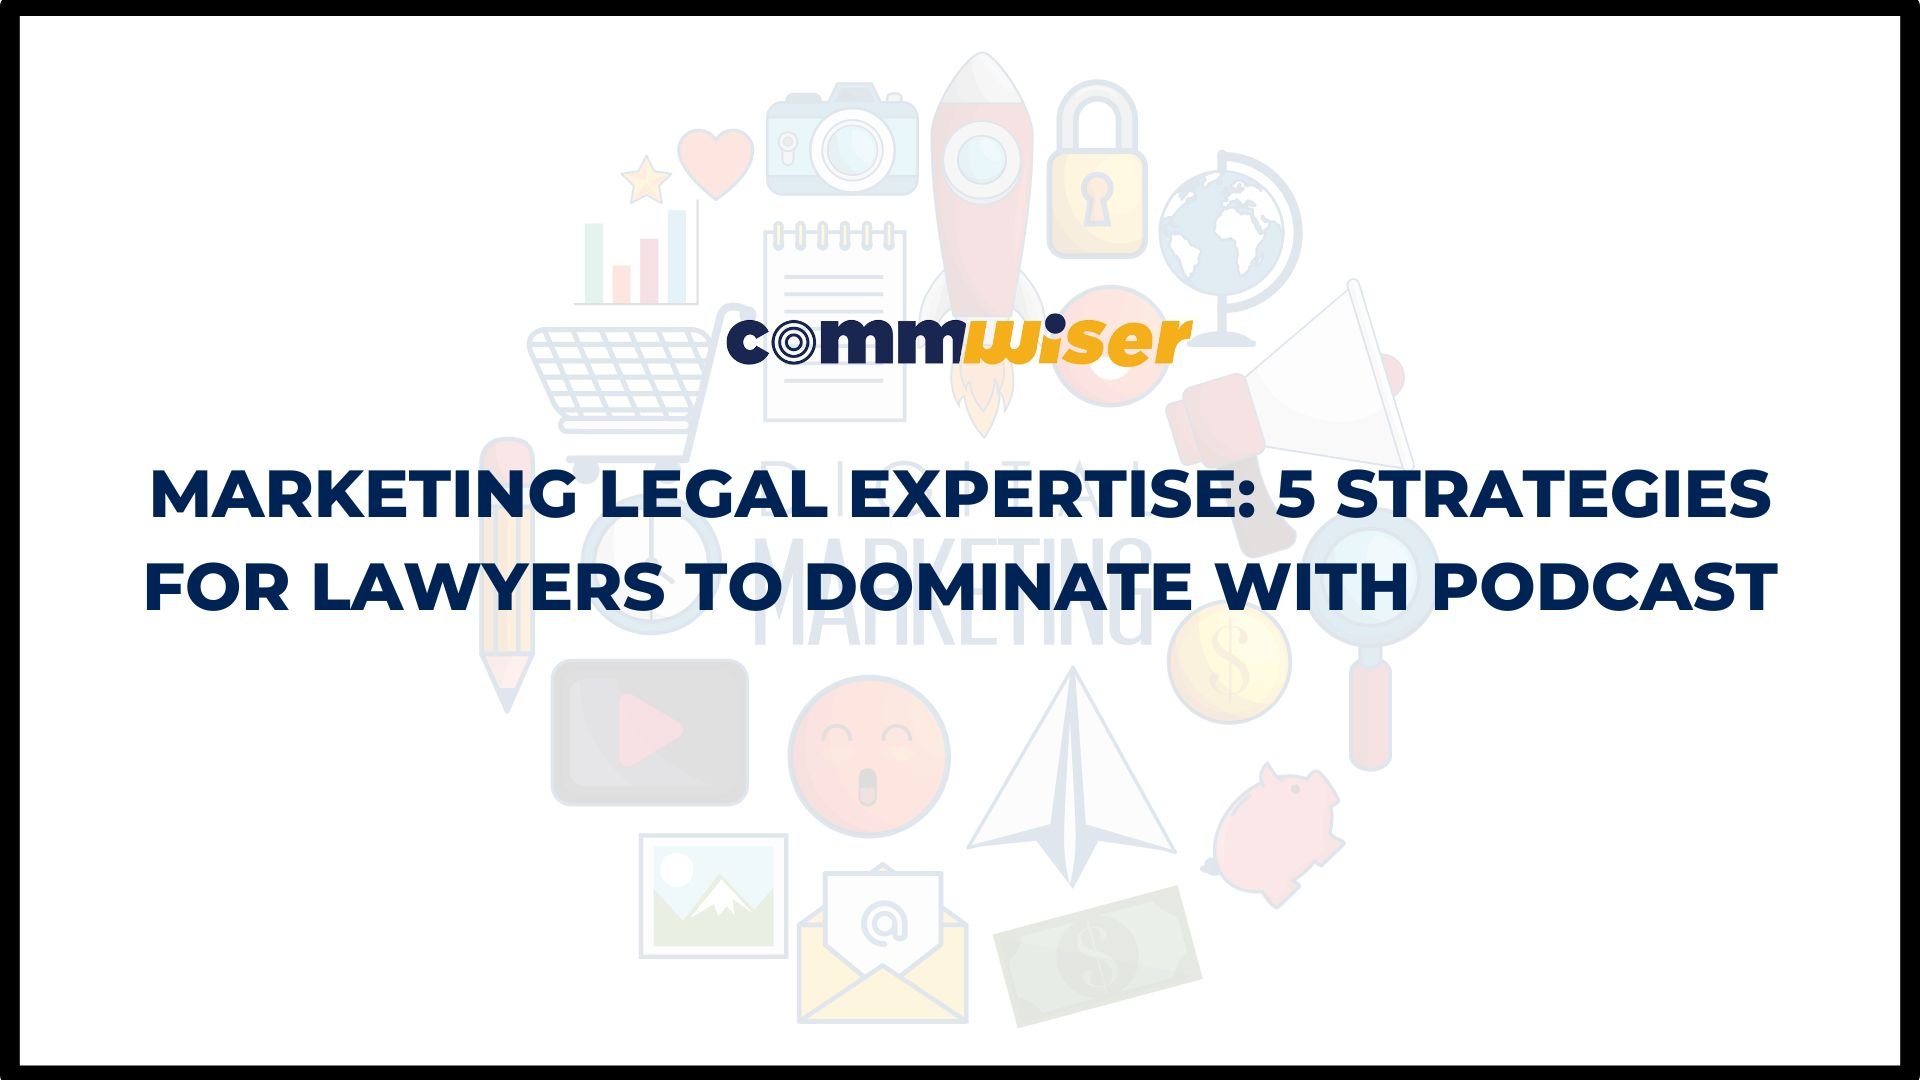 MARKETING LEGAL EXPERTISE: 5 STRATEGIES FOR LAWYERS TO DOMINATE WITH PODCASTS